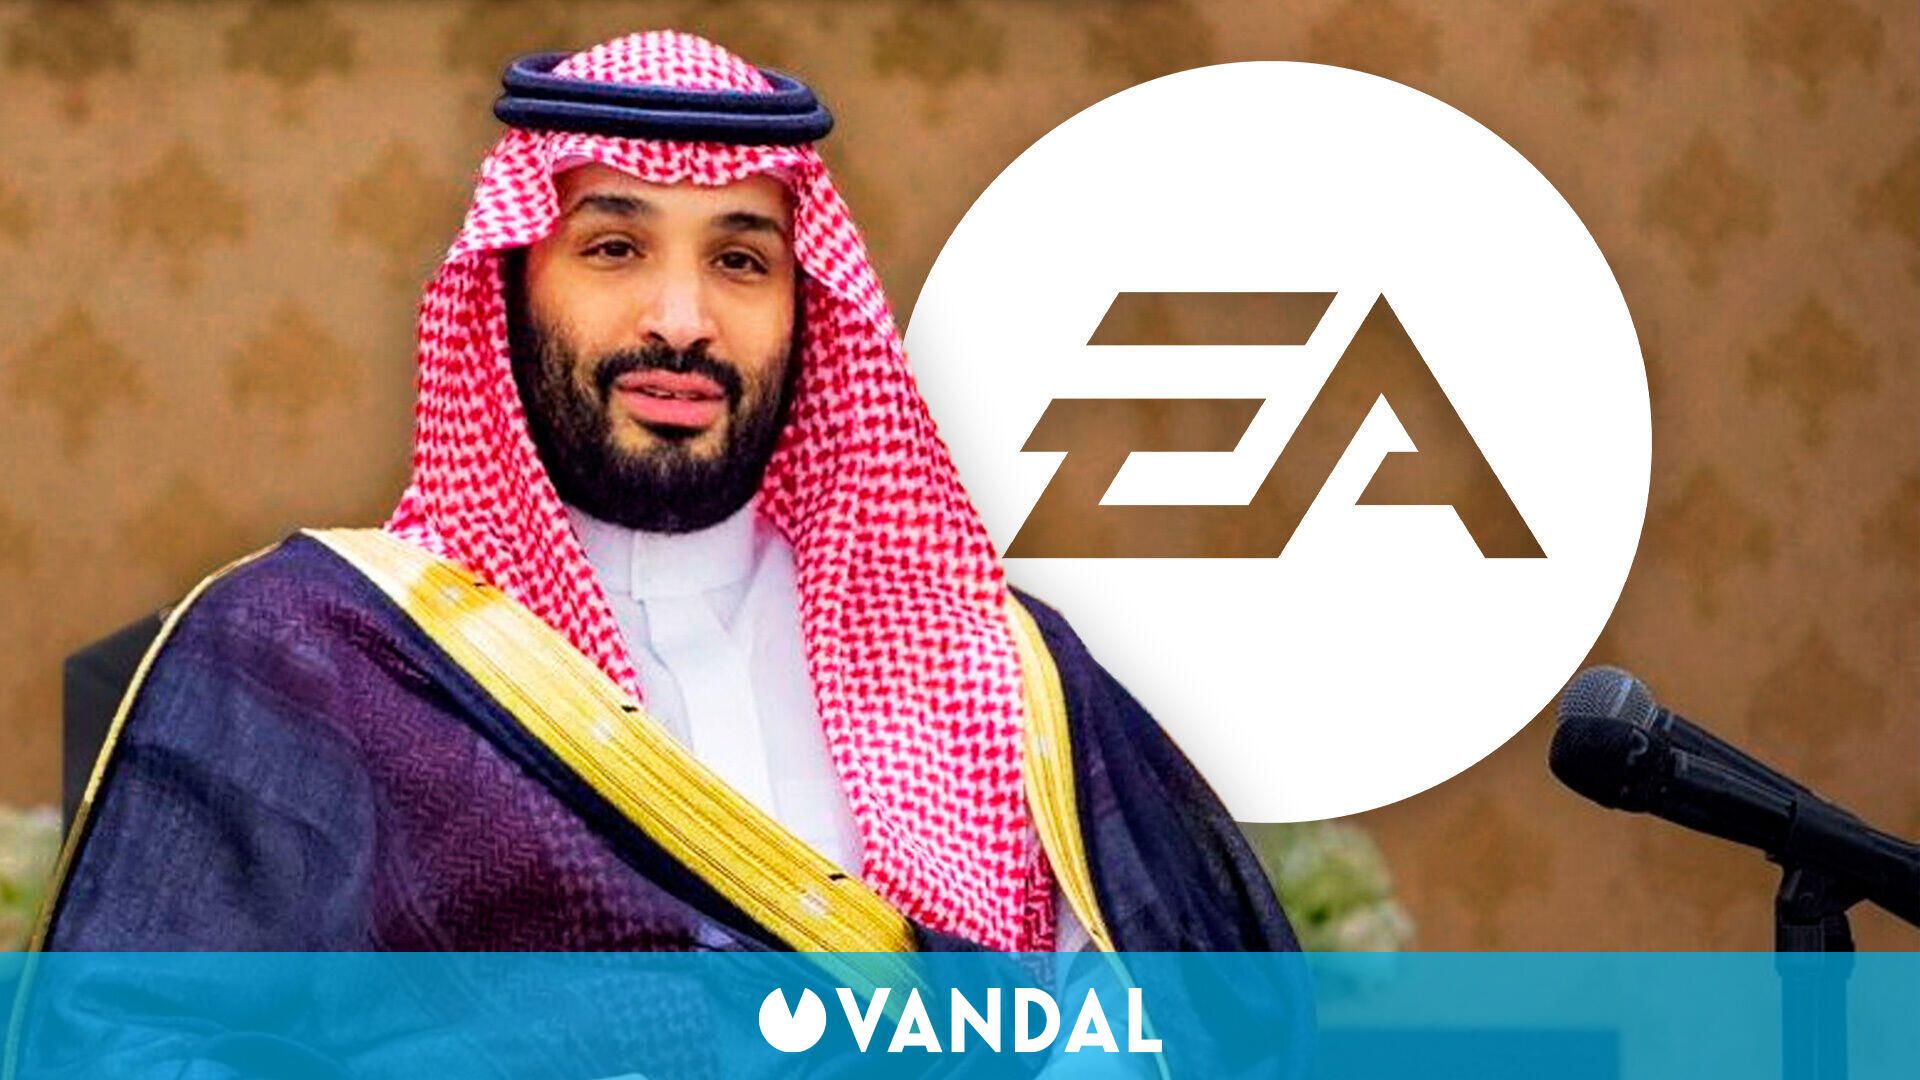 Saudi Arabia increases its investment in electronic arts by 55%